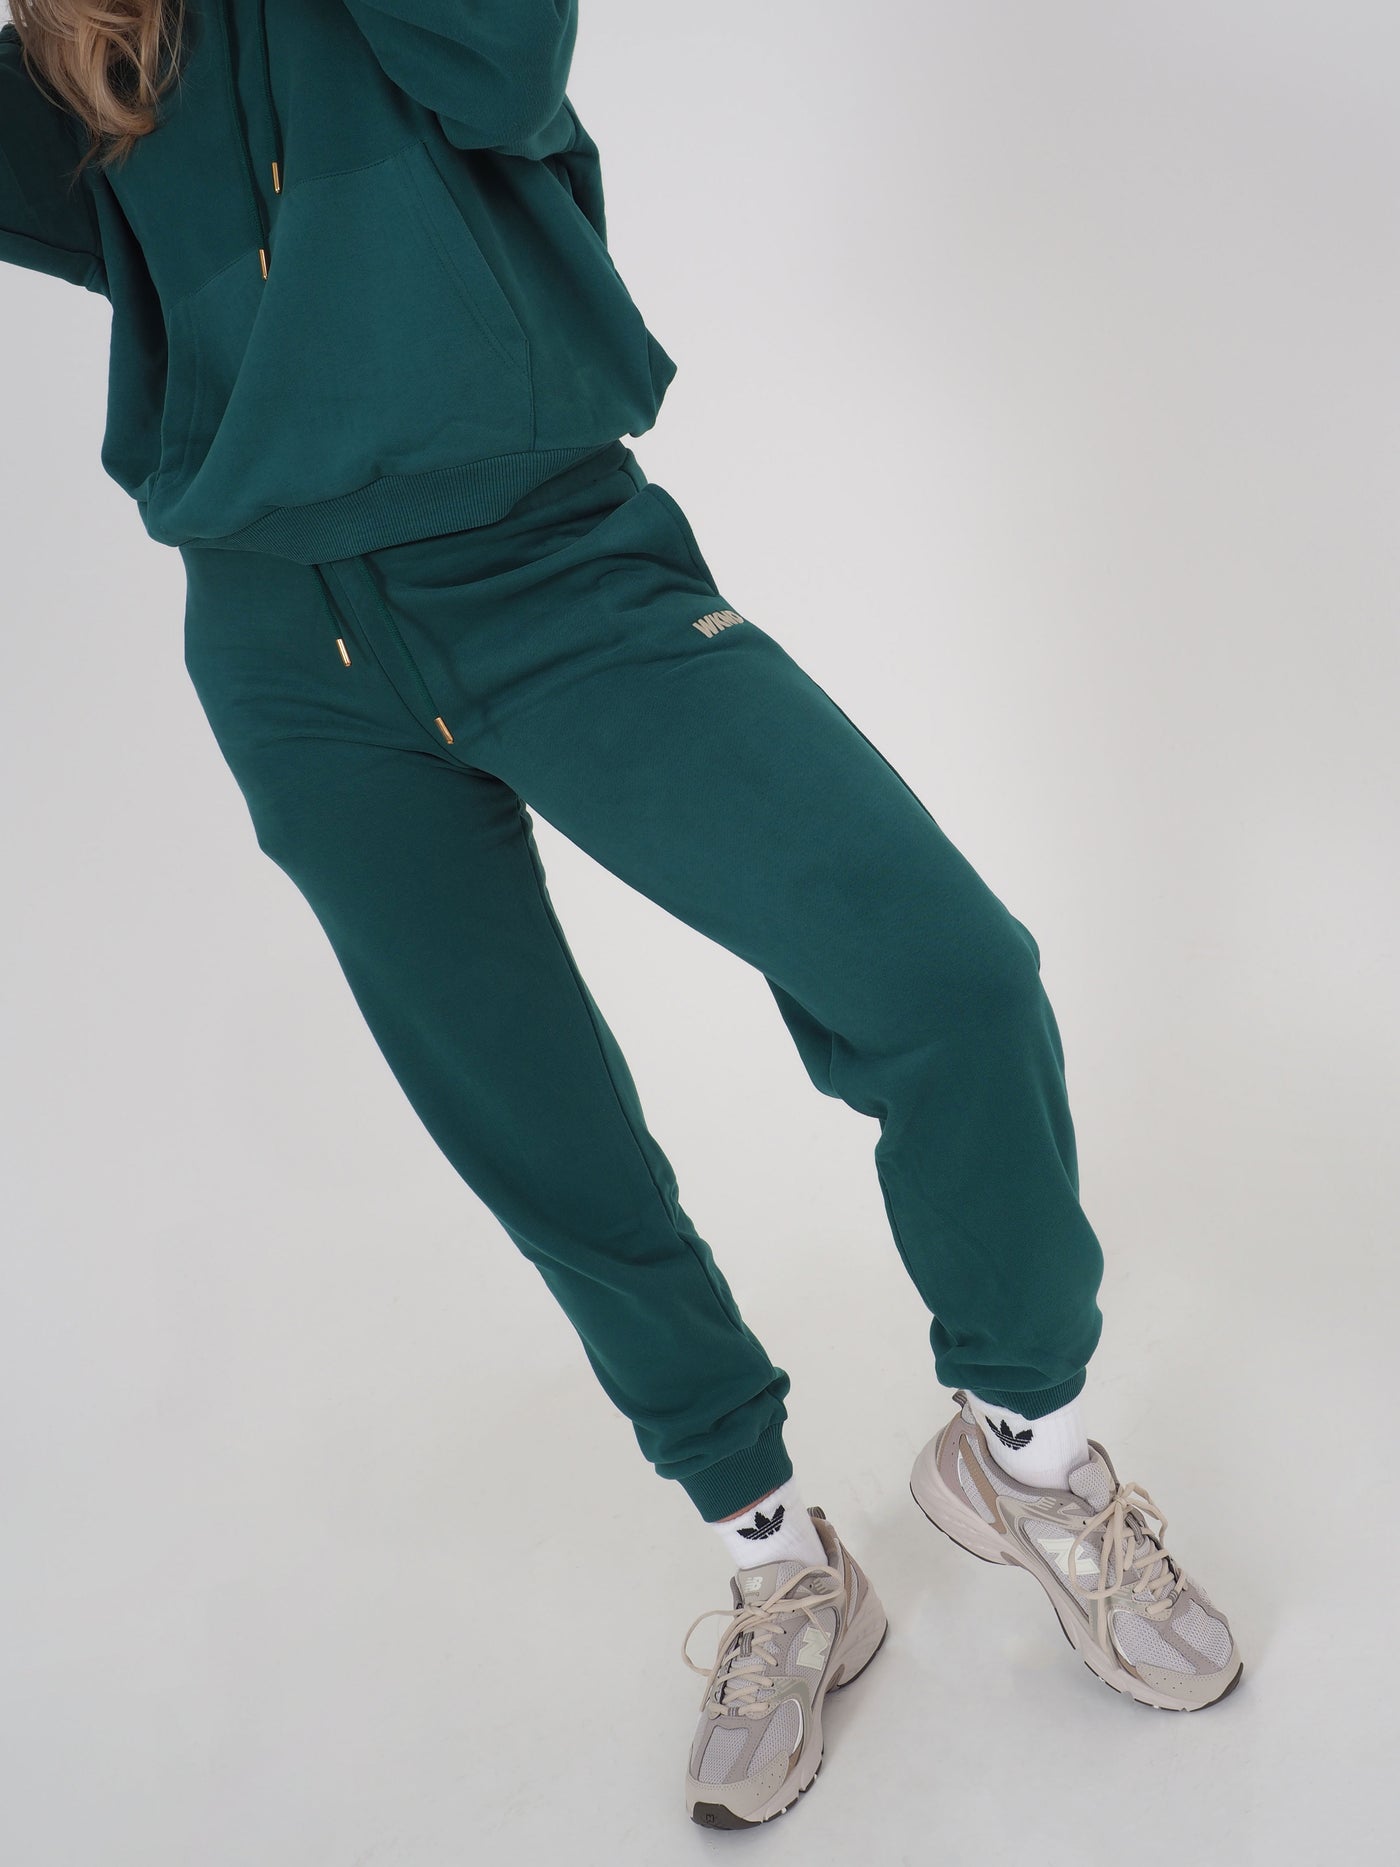 Model wearing green joggers and matching hoodie. WKND is embroidered to the leg.